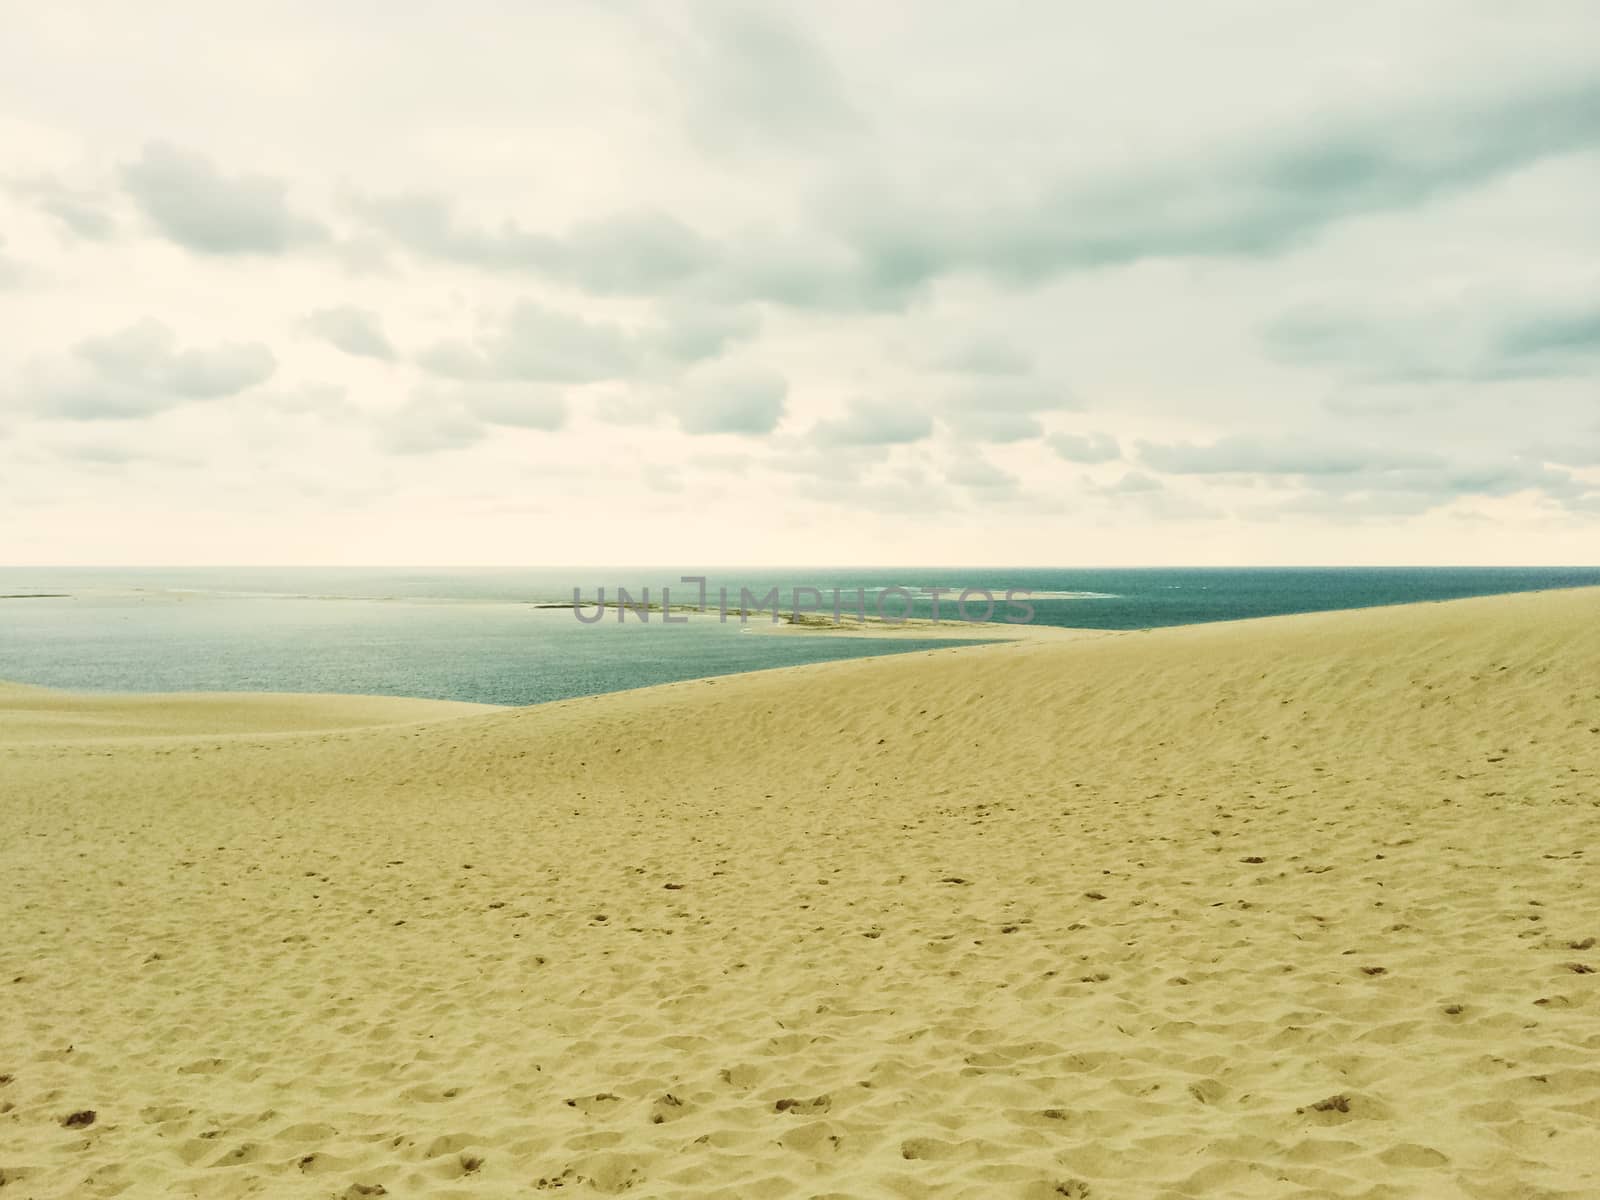 Sand dunes, sea and cloudy sky. Dune of Pilat (Dune du Pilat), the biggest sand dune in Europe, located in the Arcachon Bay area, France.